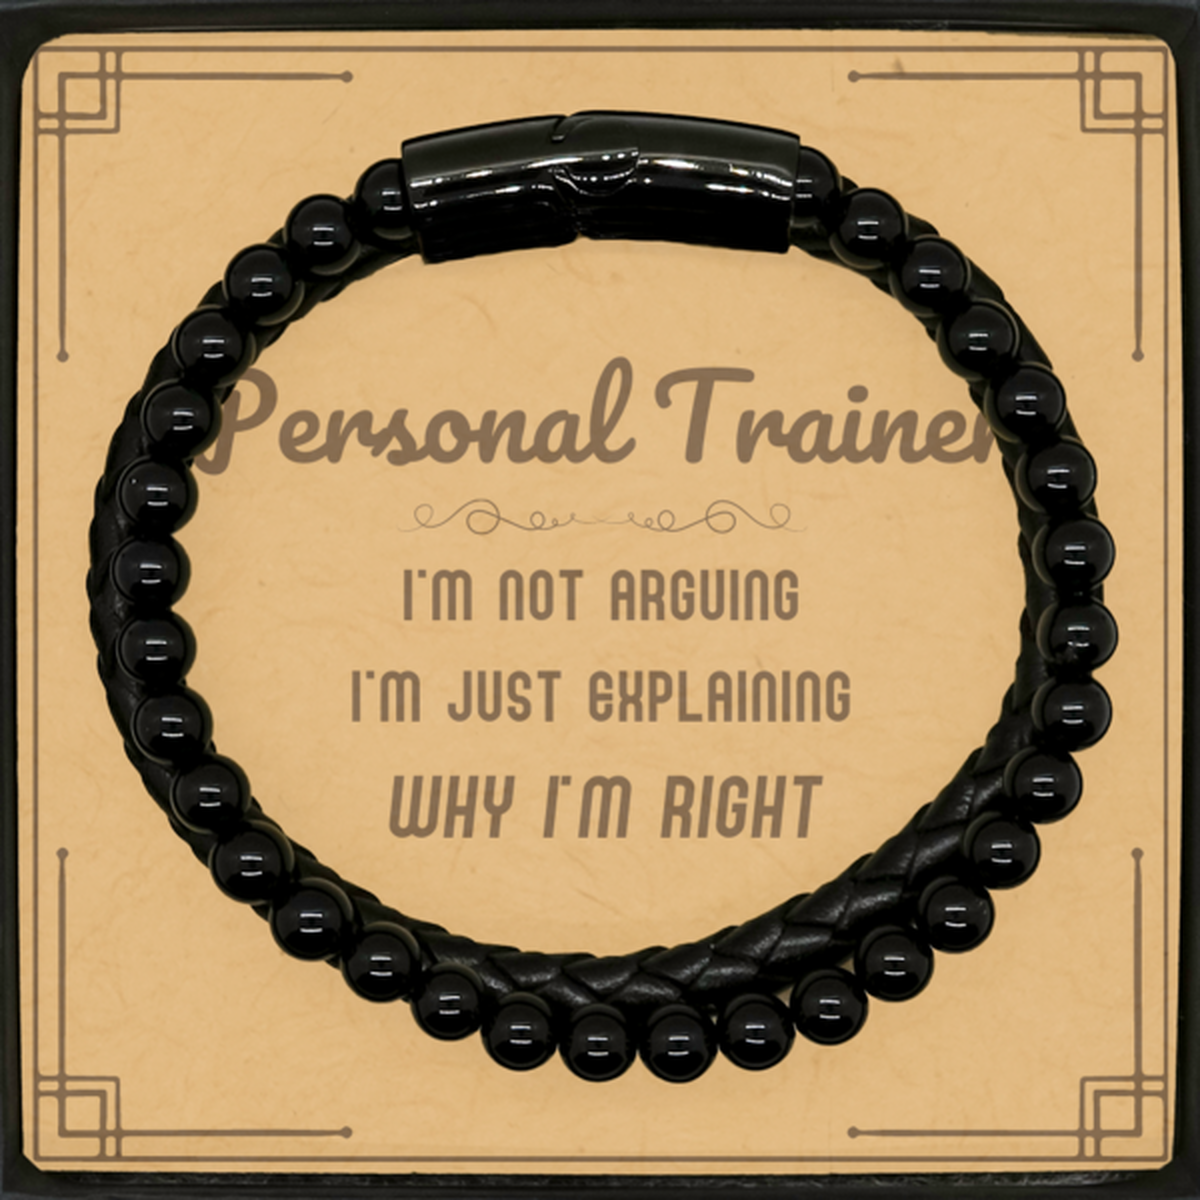 Personal Trainer I'm not Arguing. I'm Just Explaining Why I'm RIGHT Stone Leather Bracelets, Funny Saying Quote Personal Trainer Gifts For Personal Trainer Message Card Graduation Birthday Christmas Gifts for Men Women Coworker